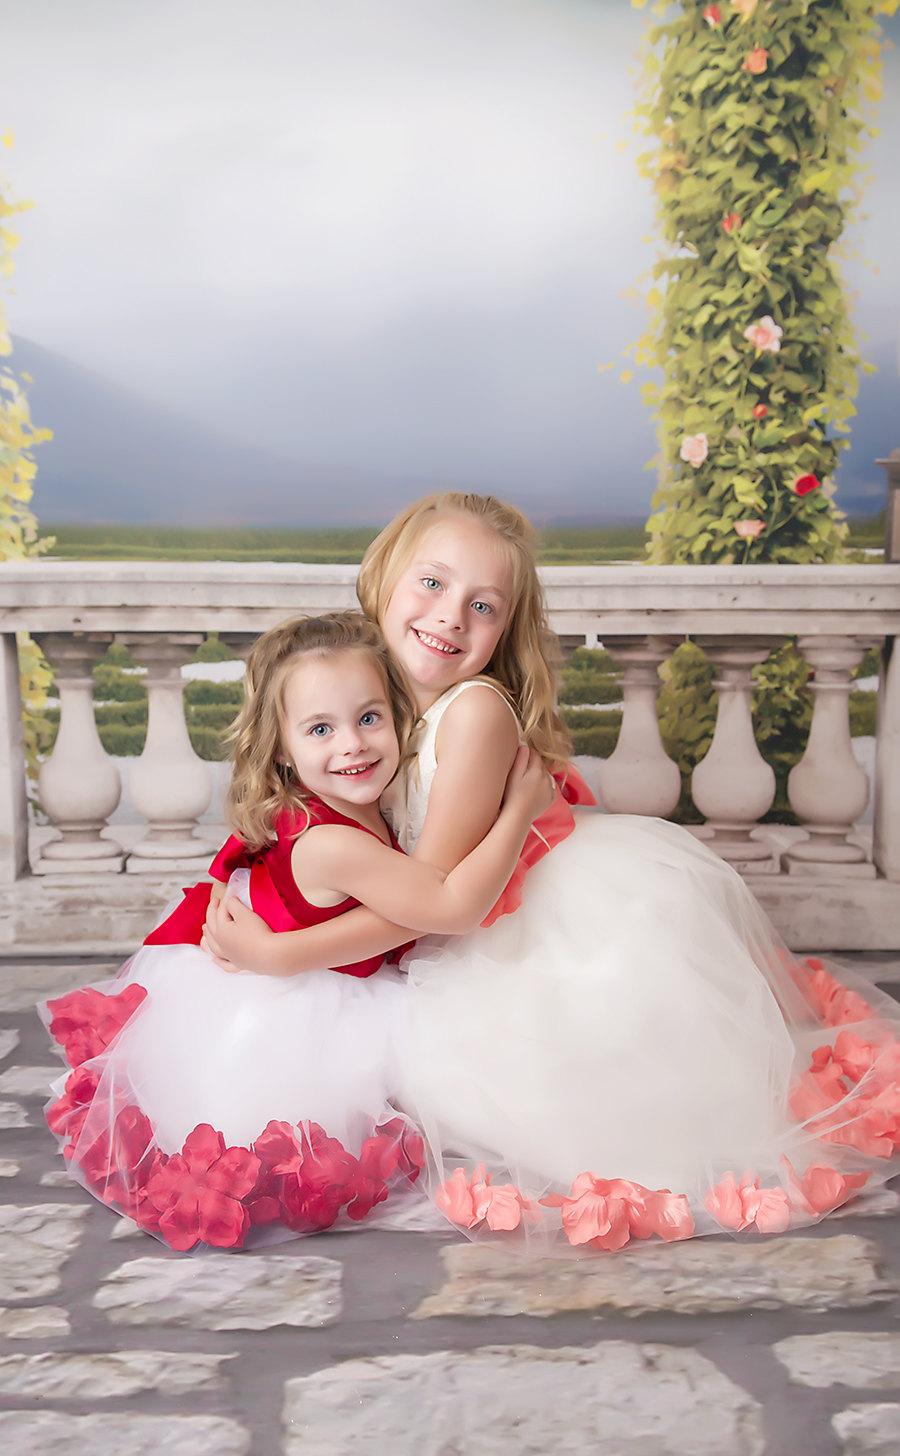 Mariage - Cute Flower Girl Dress Bridesmaid Fall Wedding Toddler Recital Junior Formal Special Occasion Holiday Easter Baptism S M 2 4 6 8 10 12 SBT11